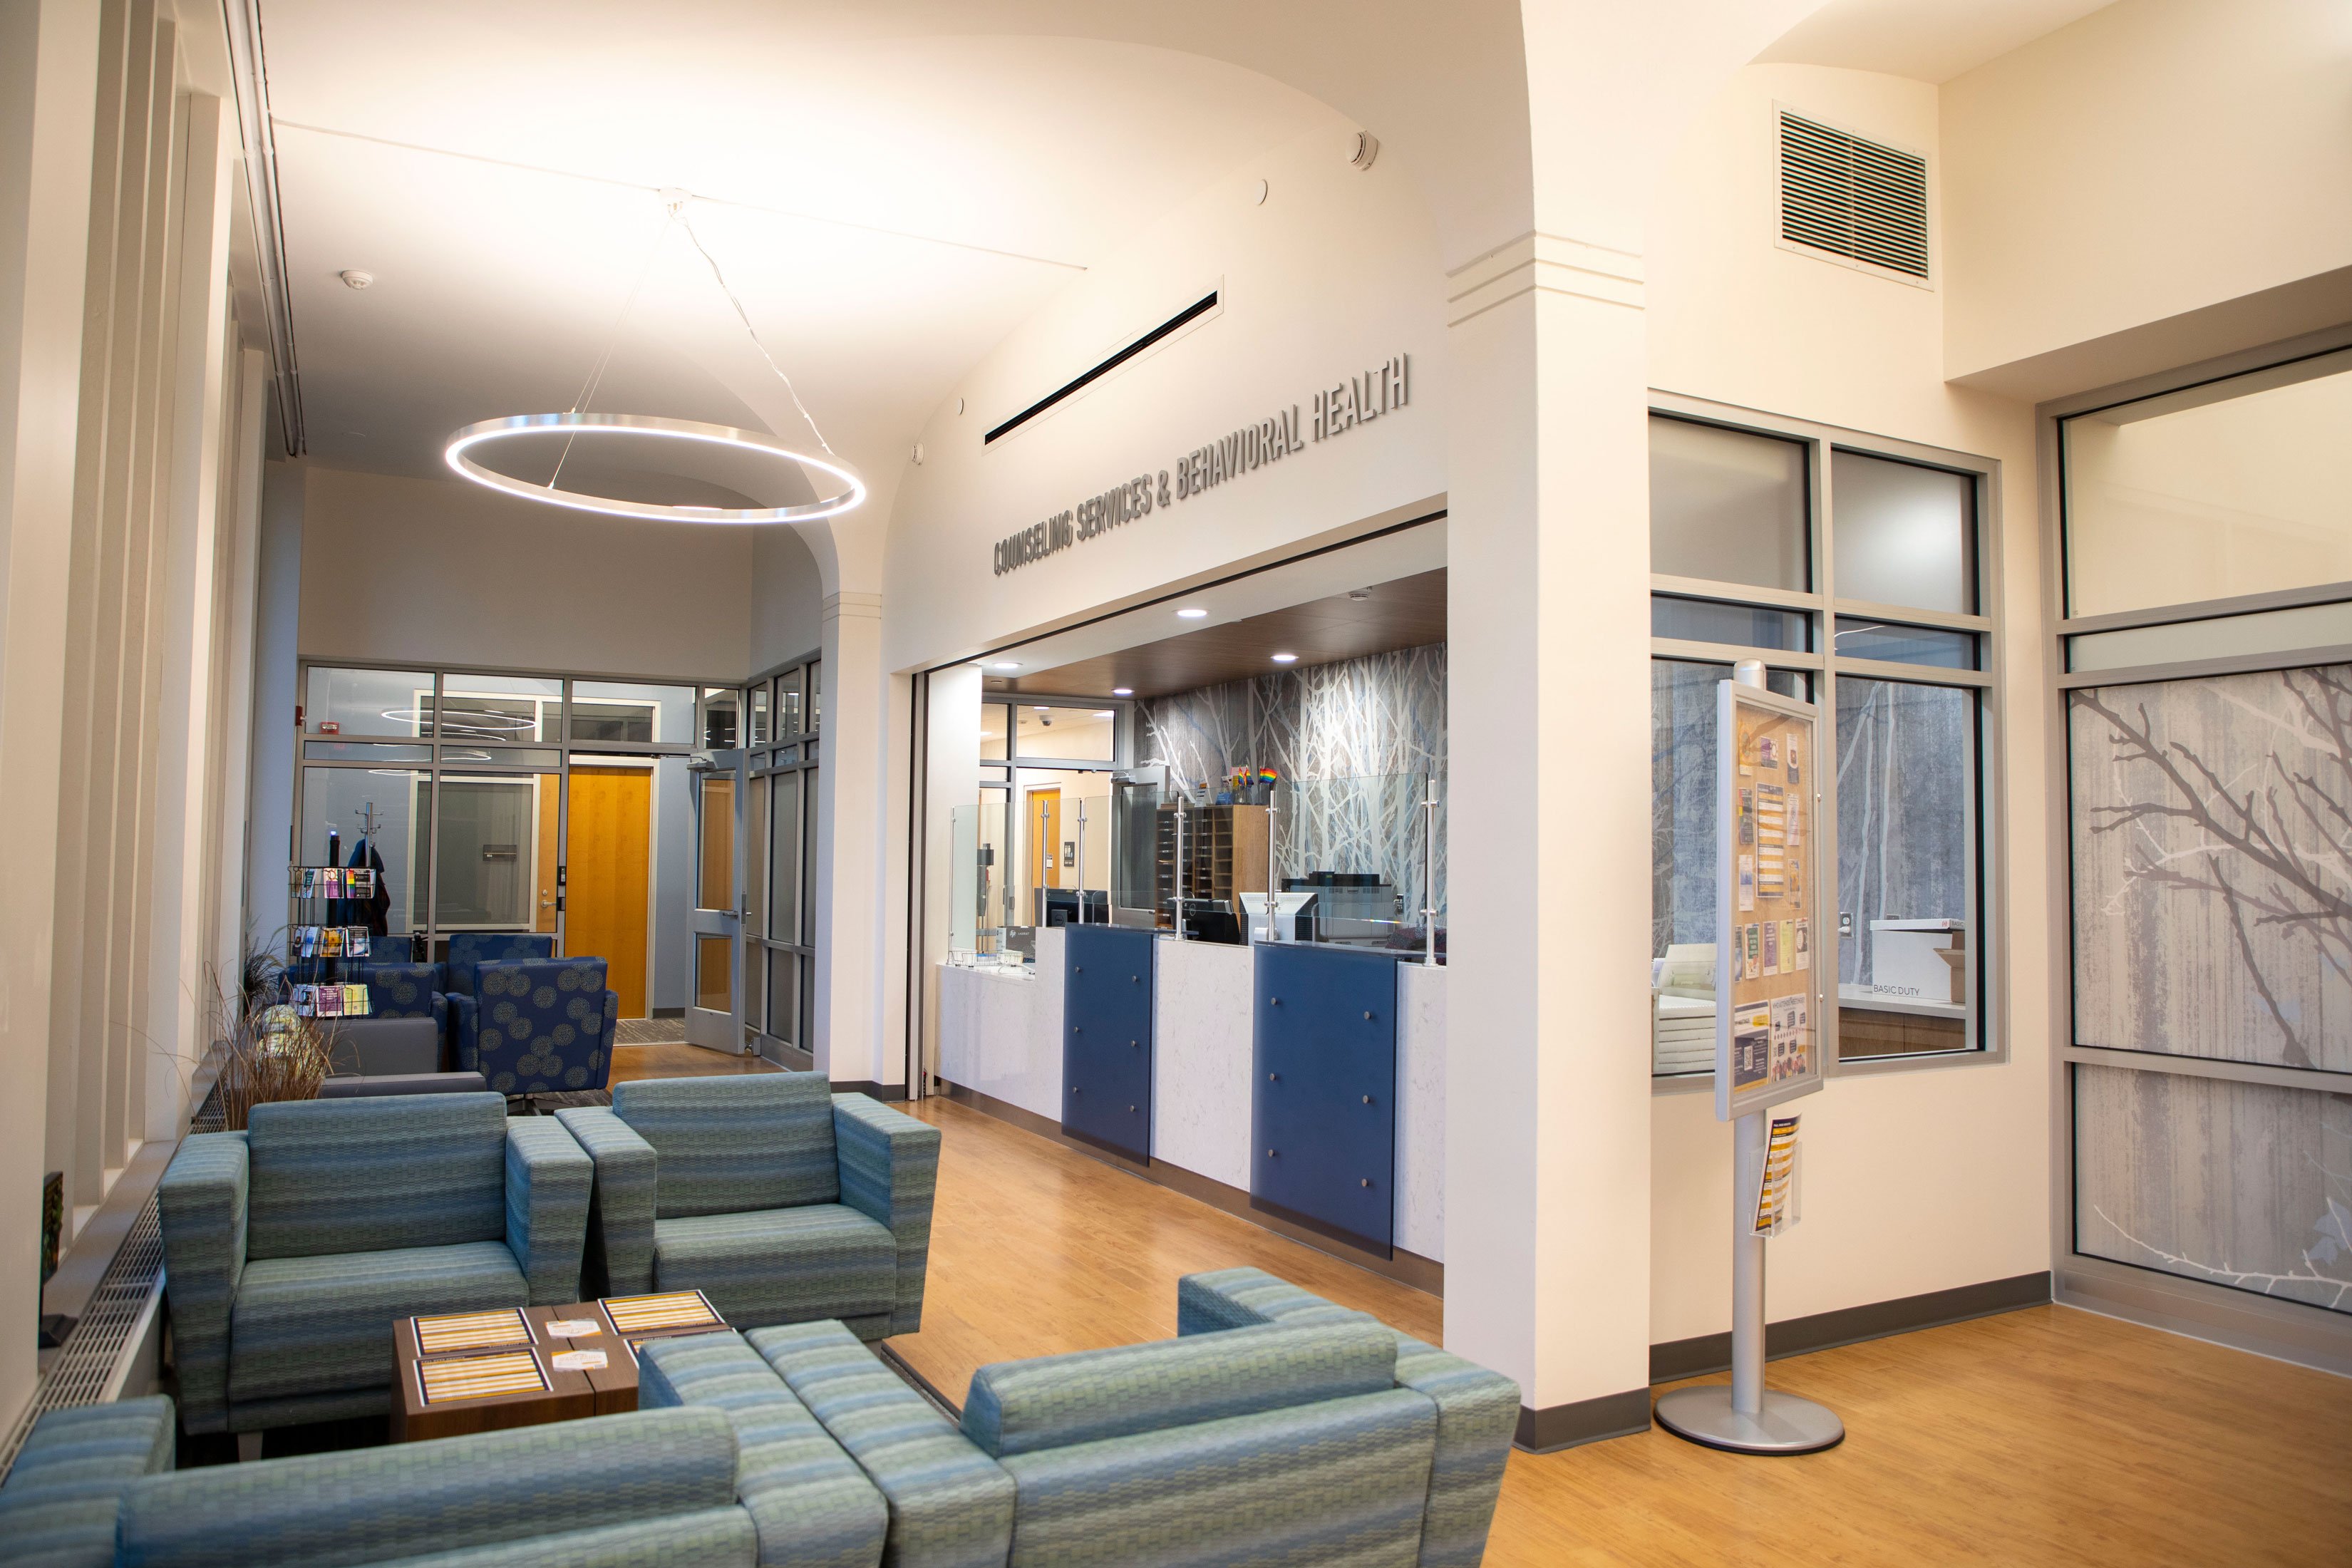 A check-in desk with the words "Counseling Services & Behavioral Health" mounted above and armchairs situated nearby.